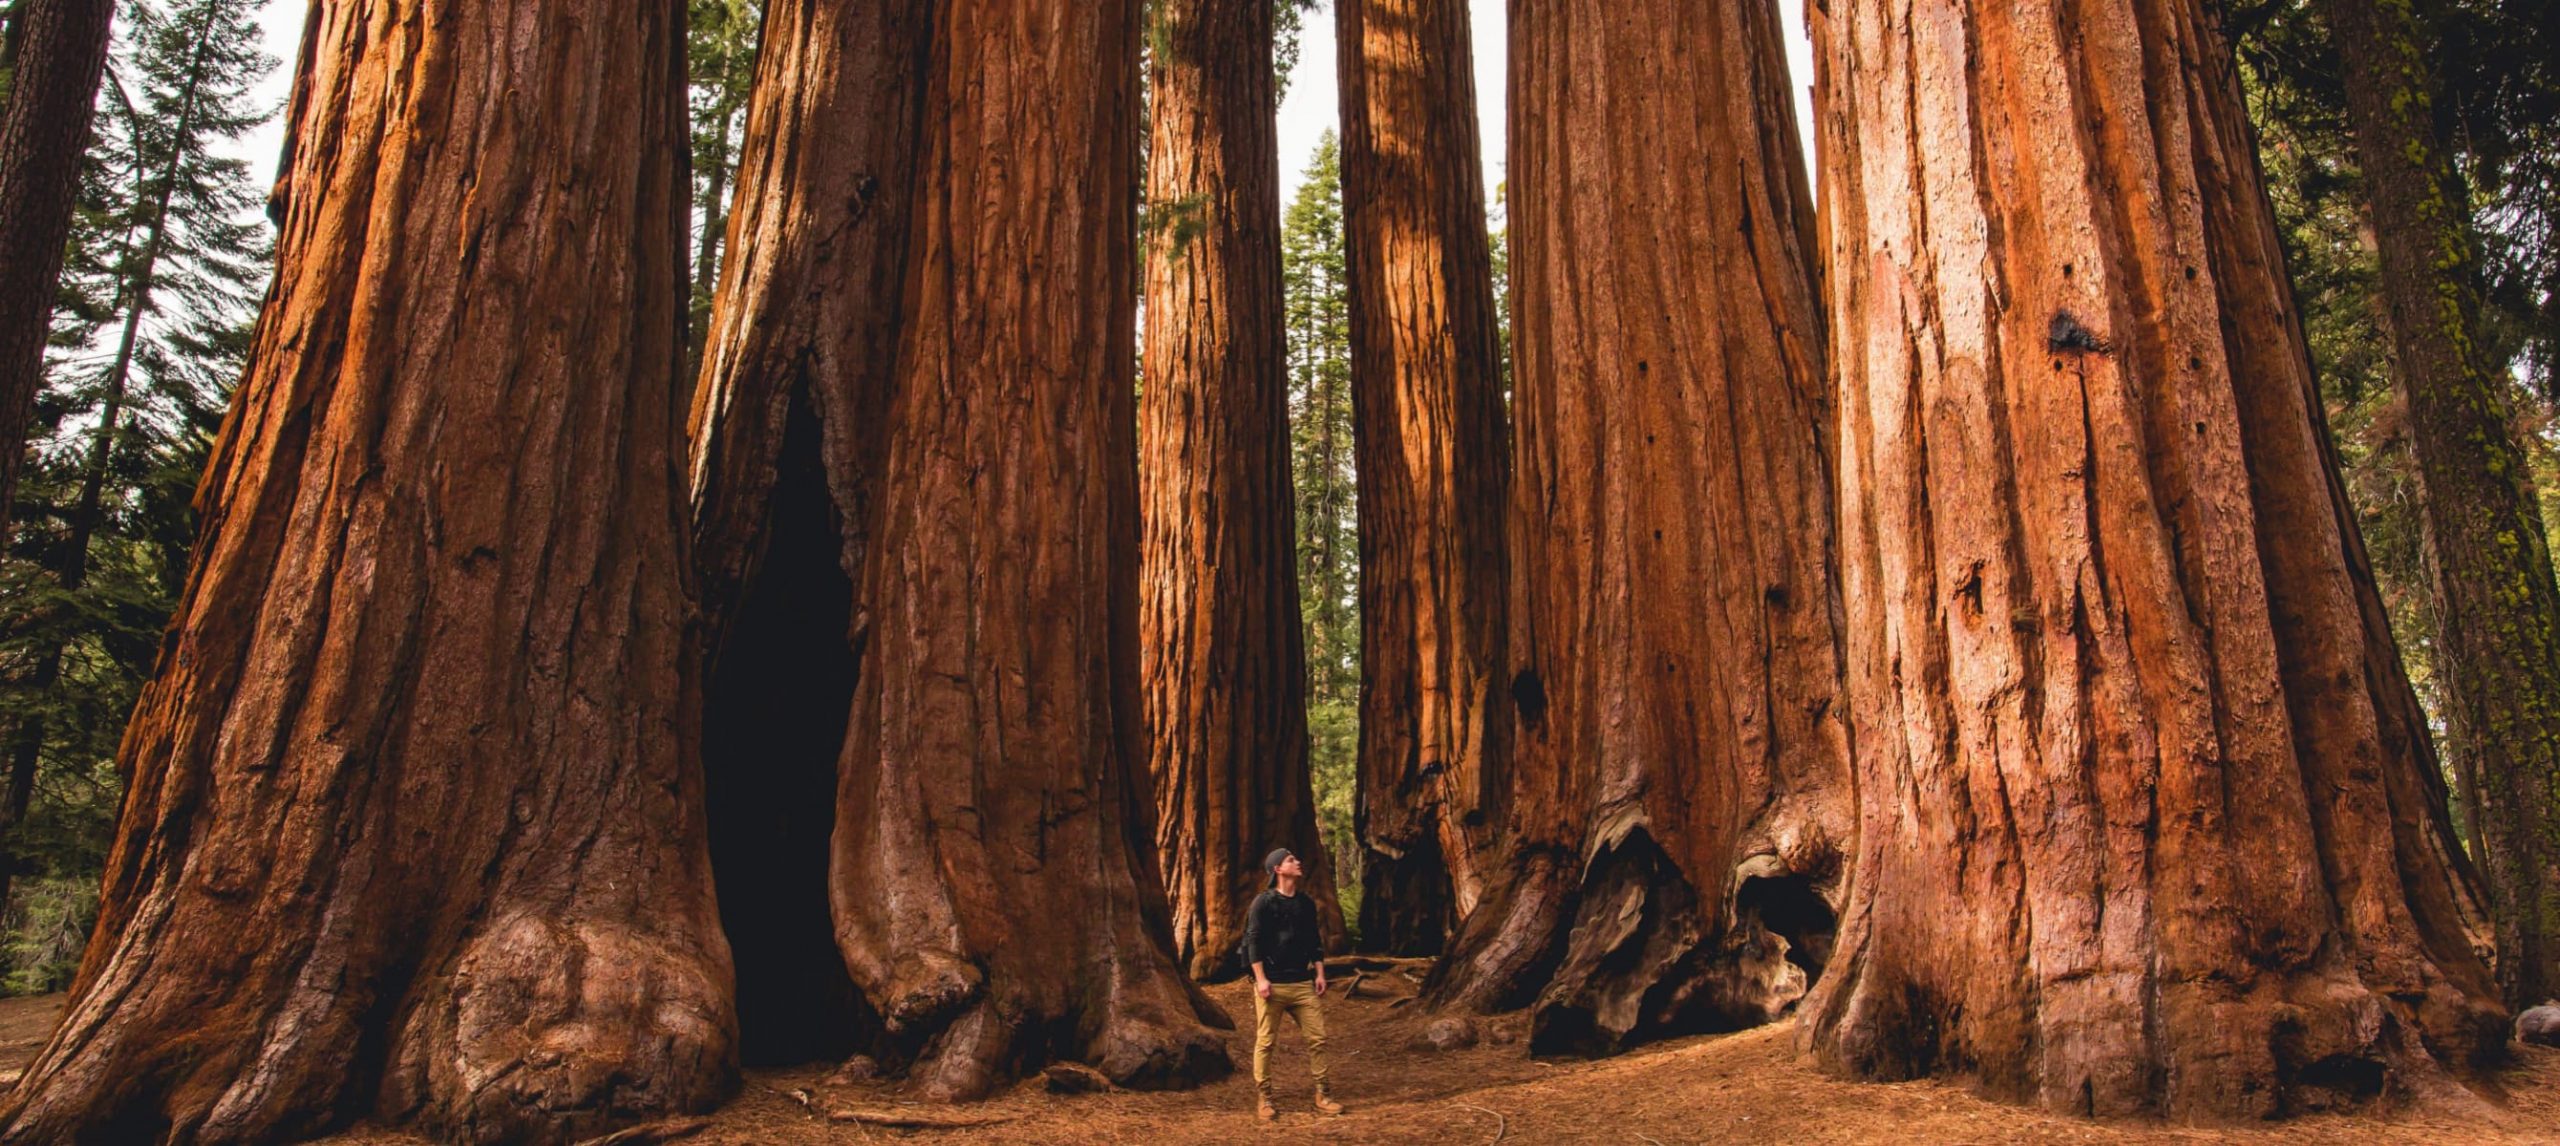 A man among a grove of giant sequoias in the Sequoia National Park, California, USA.